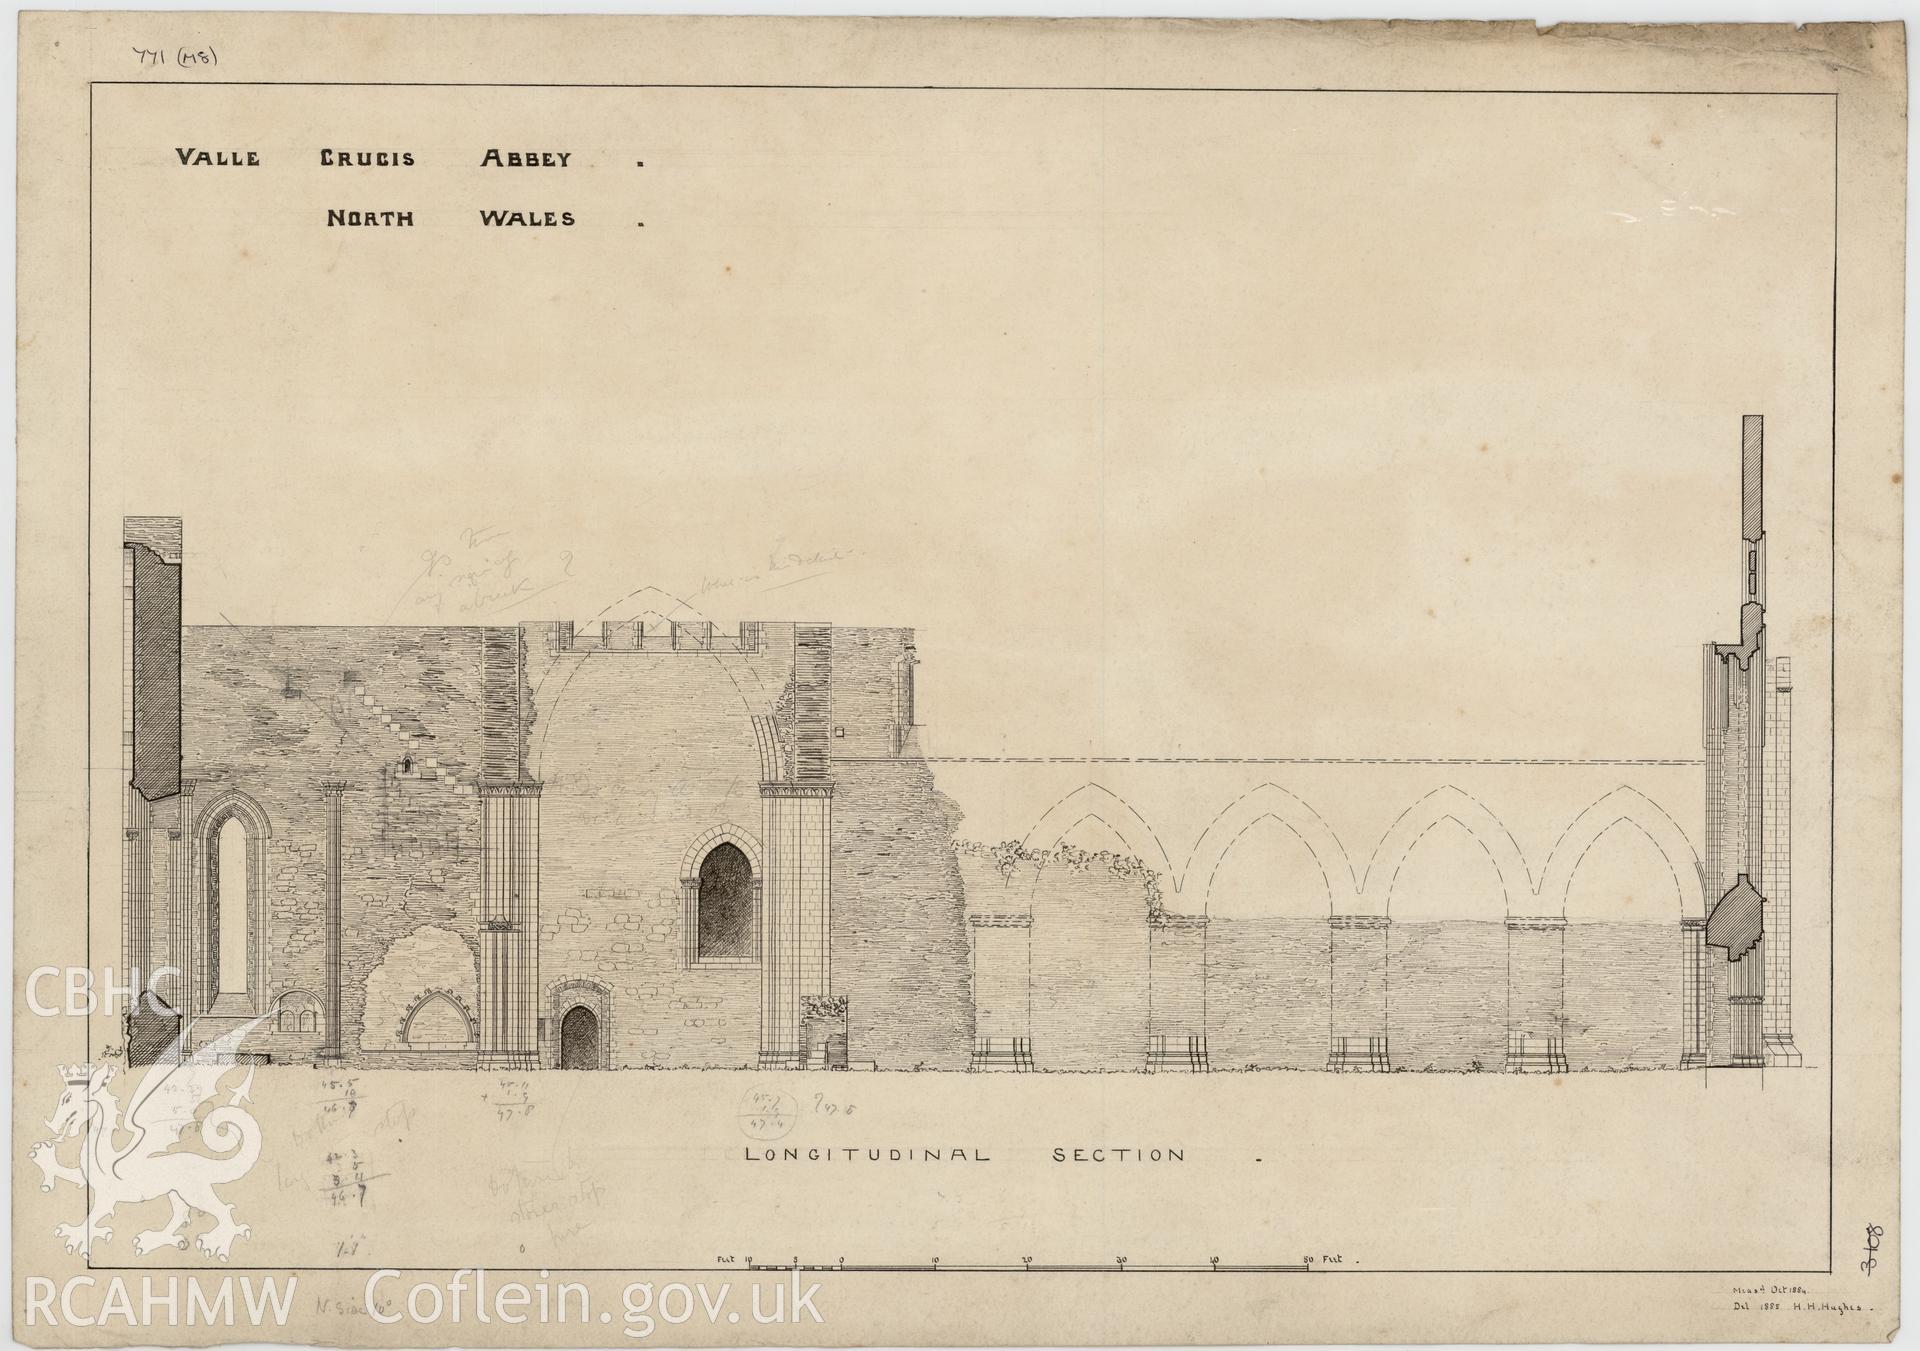 Non RCAHMW drawing by Harold Hughes showing section of Valle Crucis Abbey.